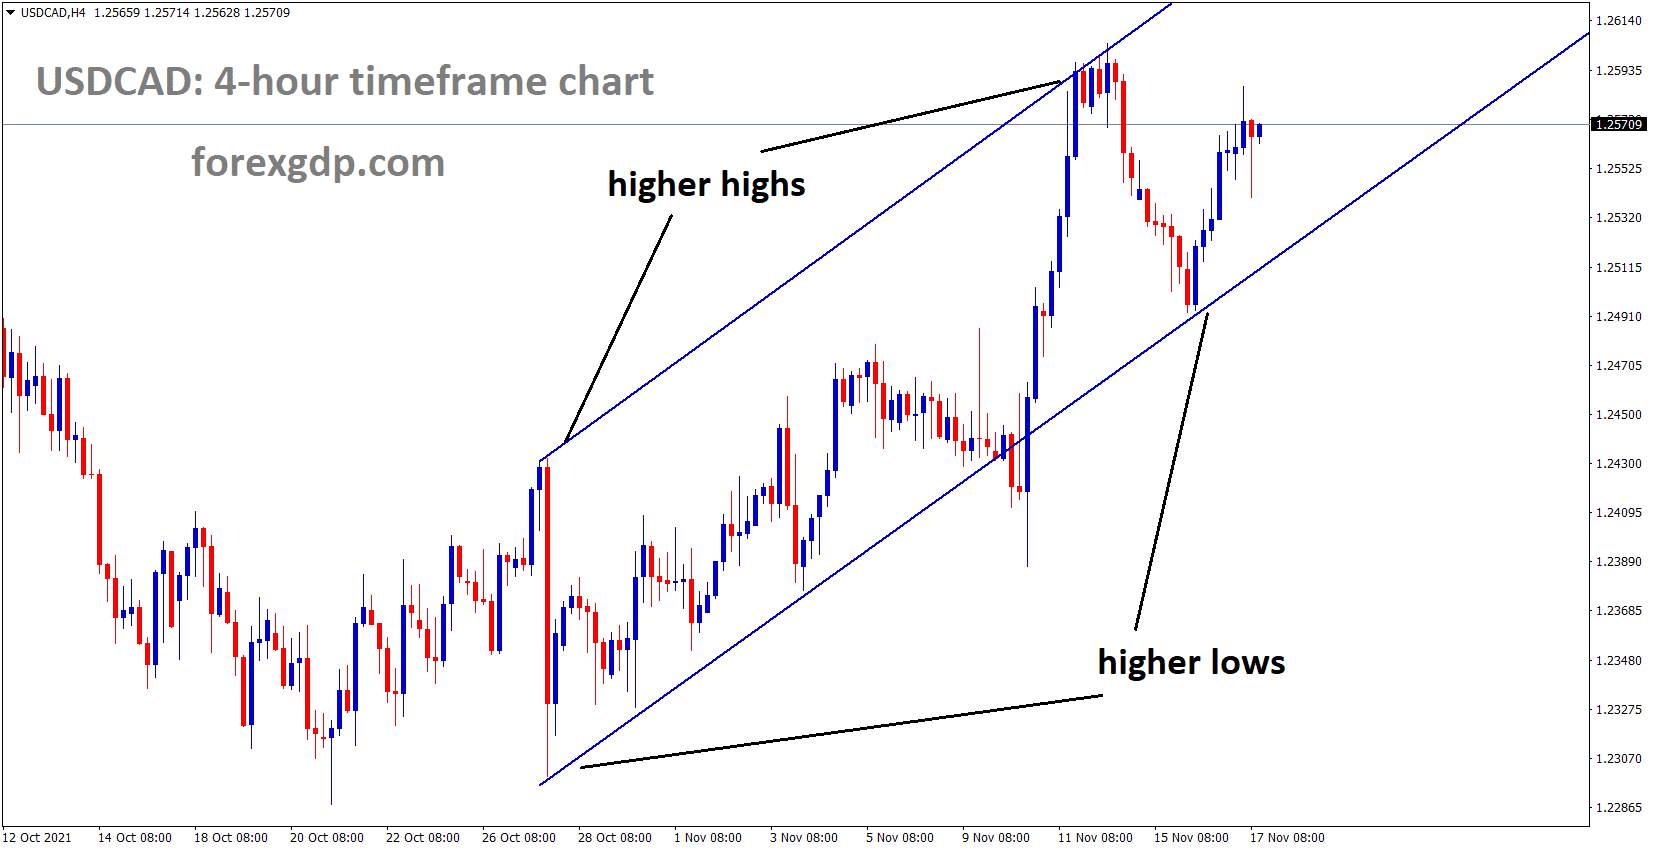 USDCAD is moving in an ascending channel and the market price stands at the middle of the channel